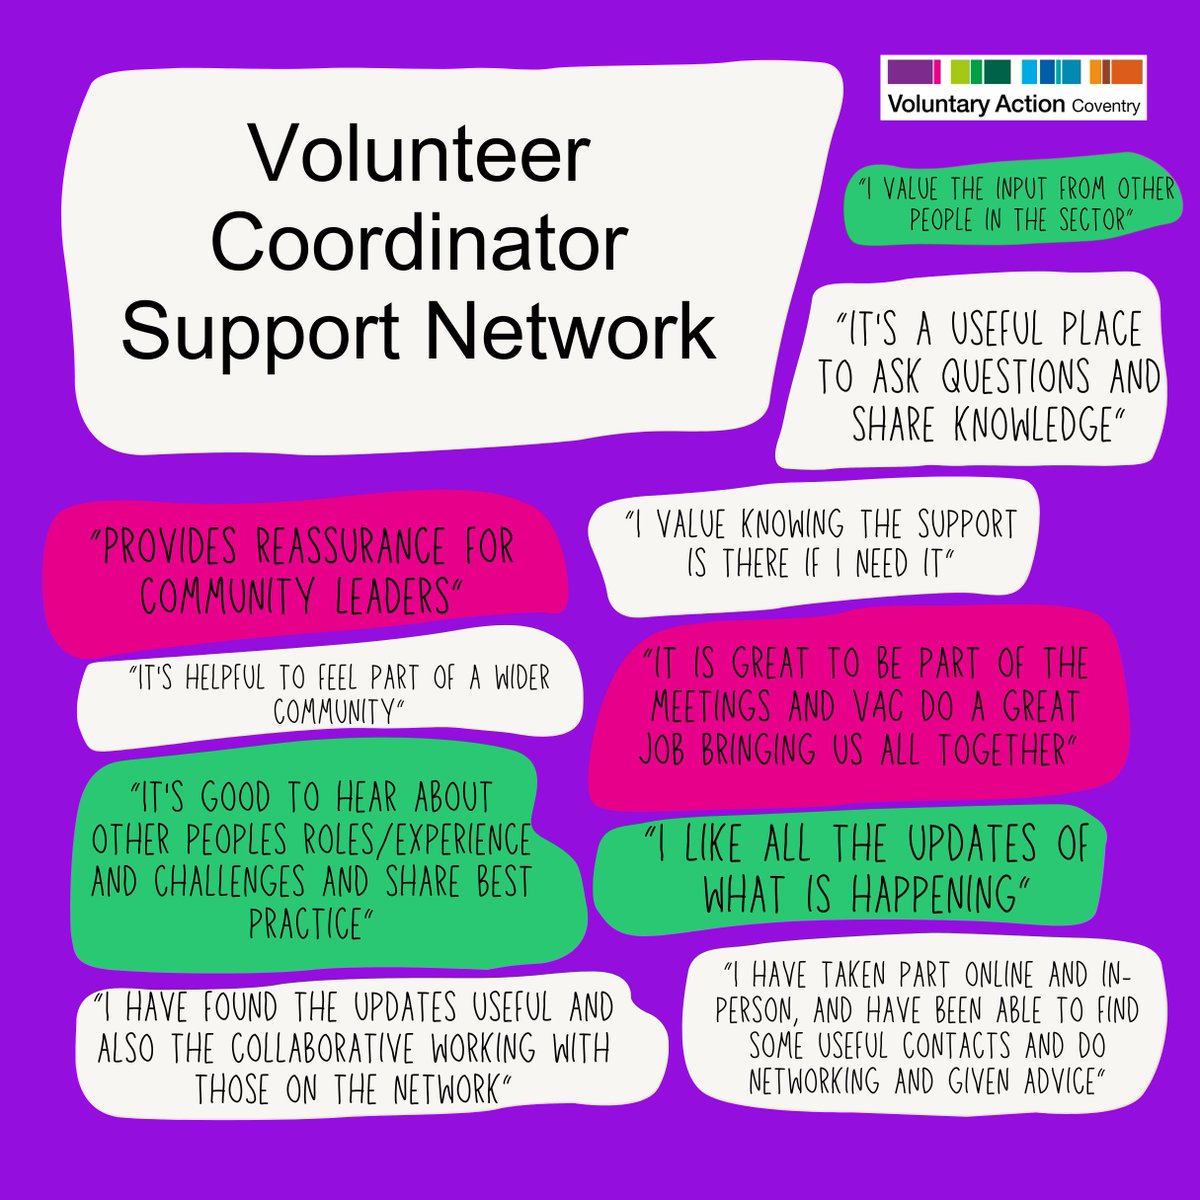 If you have #management #responsibility for #volunteers, we offer support via our #VolunteerCoordinatorSupportNetwork meetings and outlook group. Join us!
More here: vacoventry.org.uk/page/support-v…
#volunteercoordinator